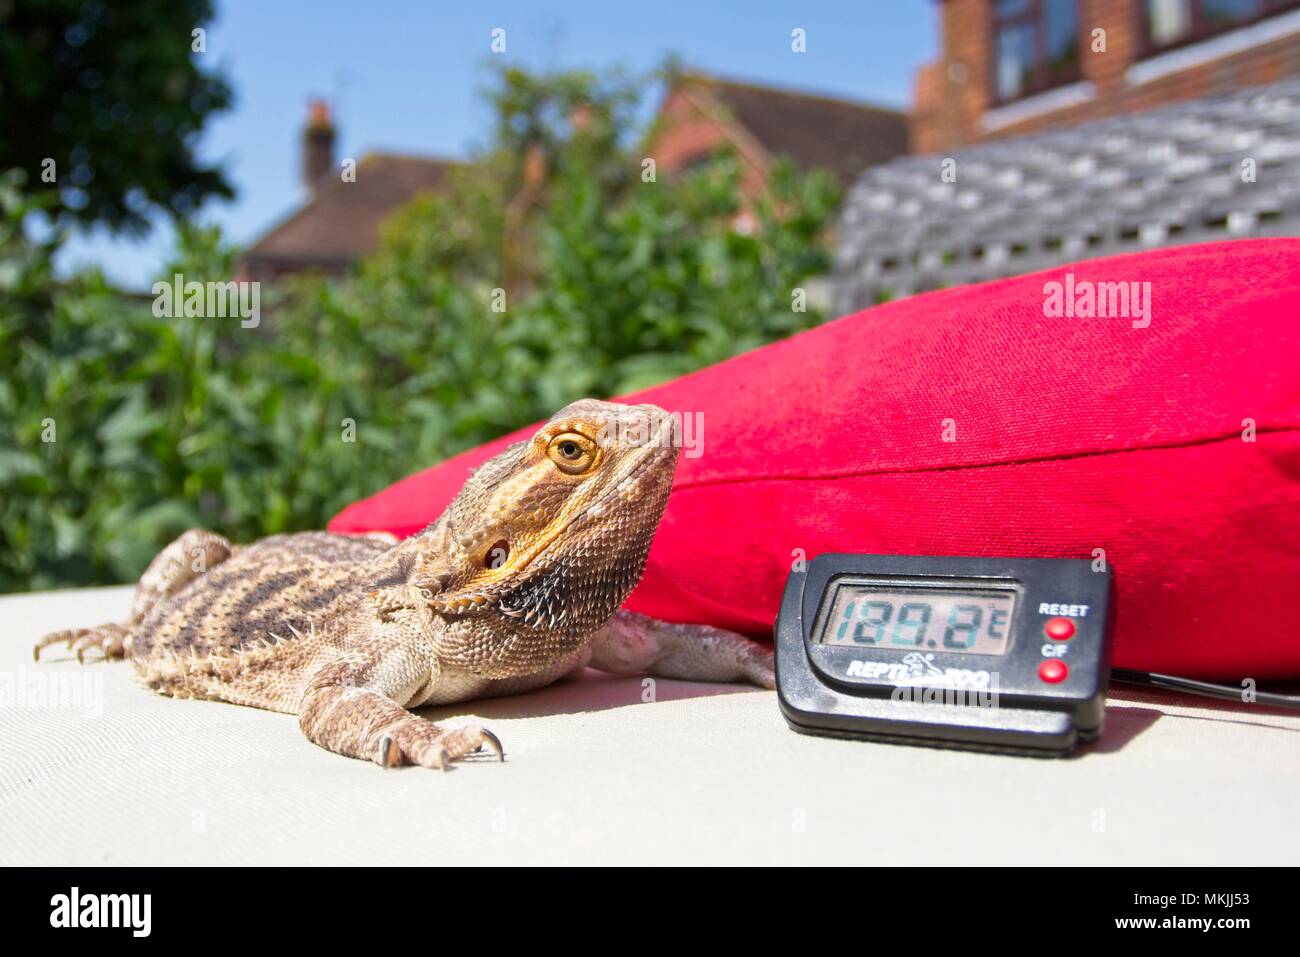 https://c8.alamy.com/comp/MKJJ53/8th-may-2018-uk-weather-after-a-continuation-of-yesterdays-good-weather-fenster-the-bearded-dragon-enjoys-basking-during-this-sunny-spell-next-to-a-thermometer-reading-in-the-high-20s-east-sussexuk-credit-ed-brownalamy-live-news-MKJJ53.jpg